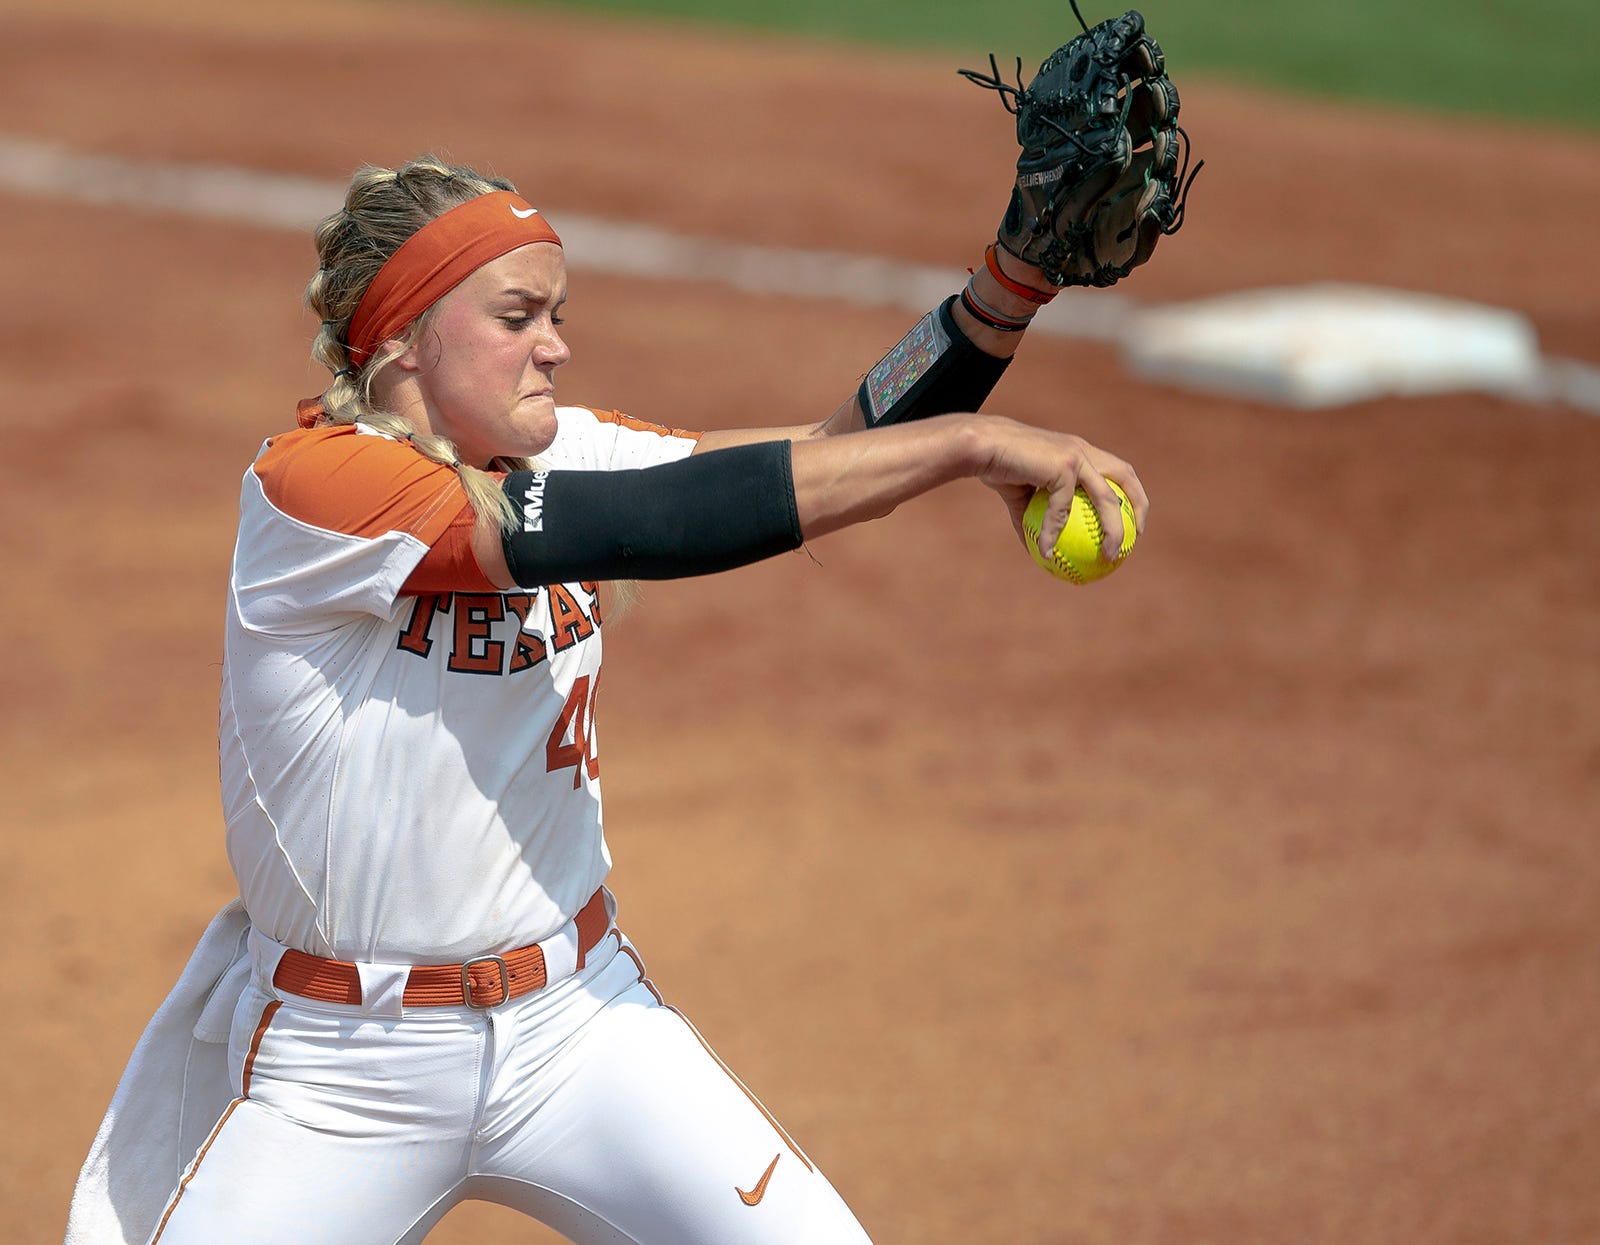 Pitcher Miranda Elish taken to hospital after throw hits her in face in Texas-Alabama game